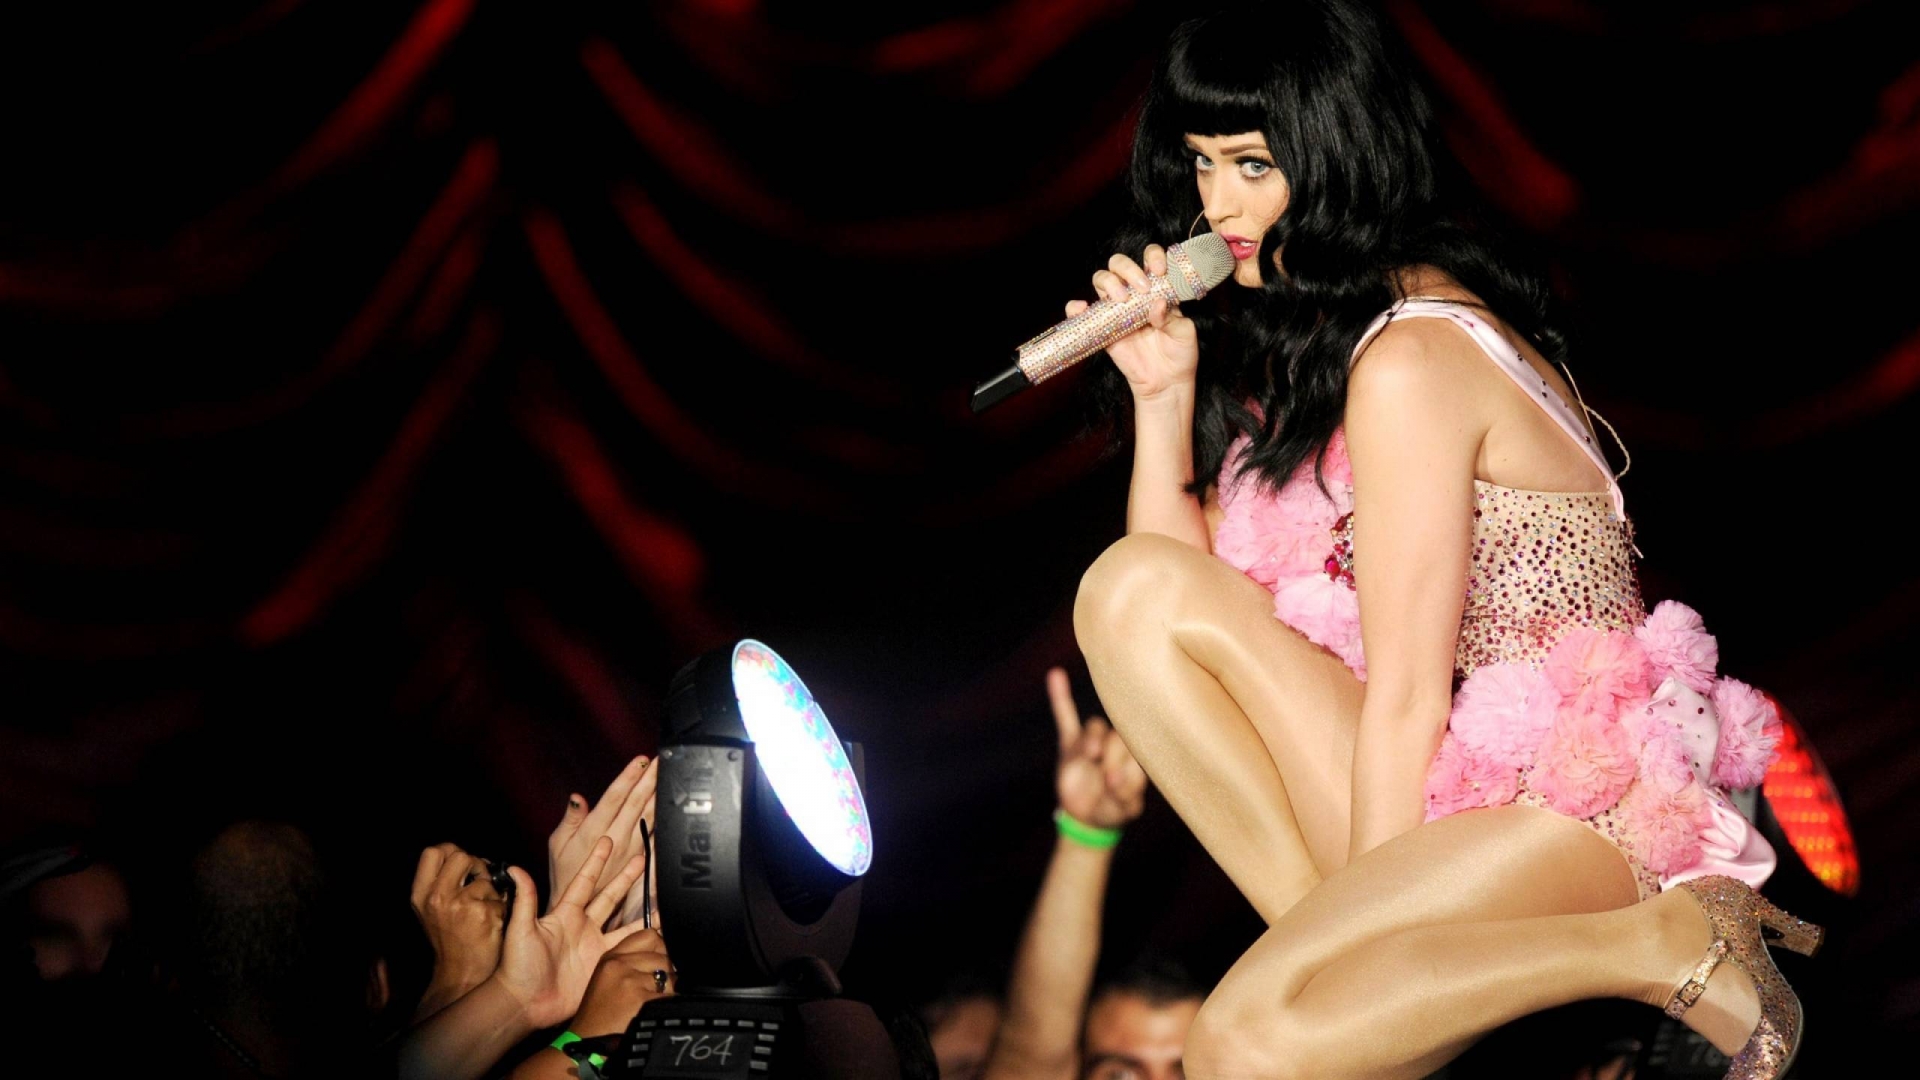 Katy Perry in Concert for 1920 x 1080 HDTV 1080p resolution